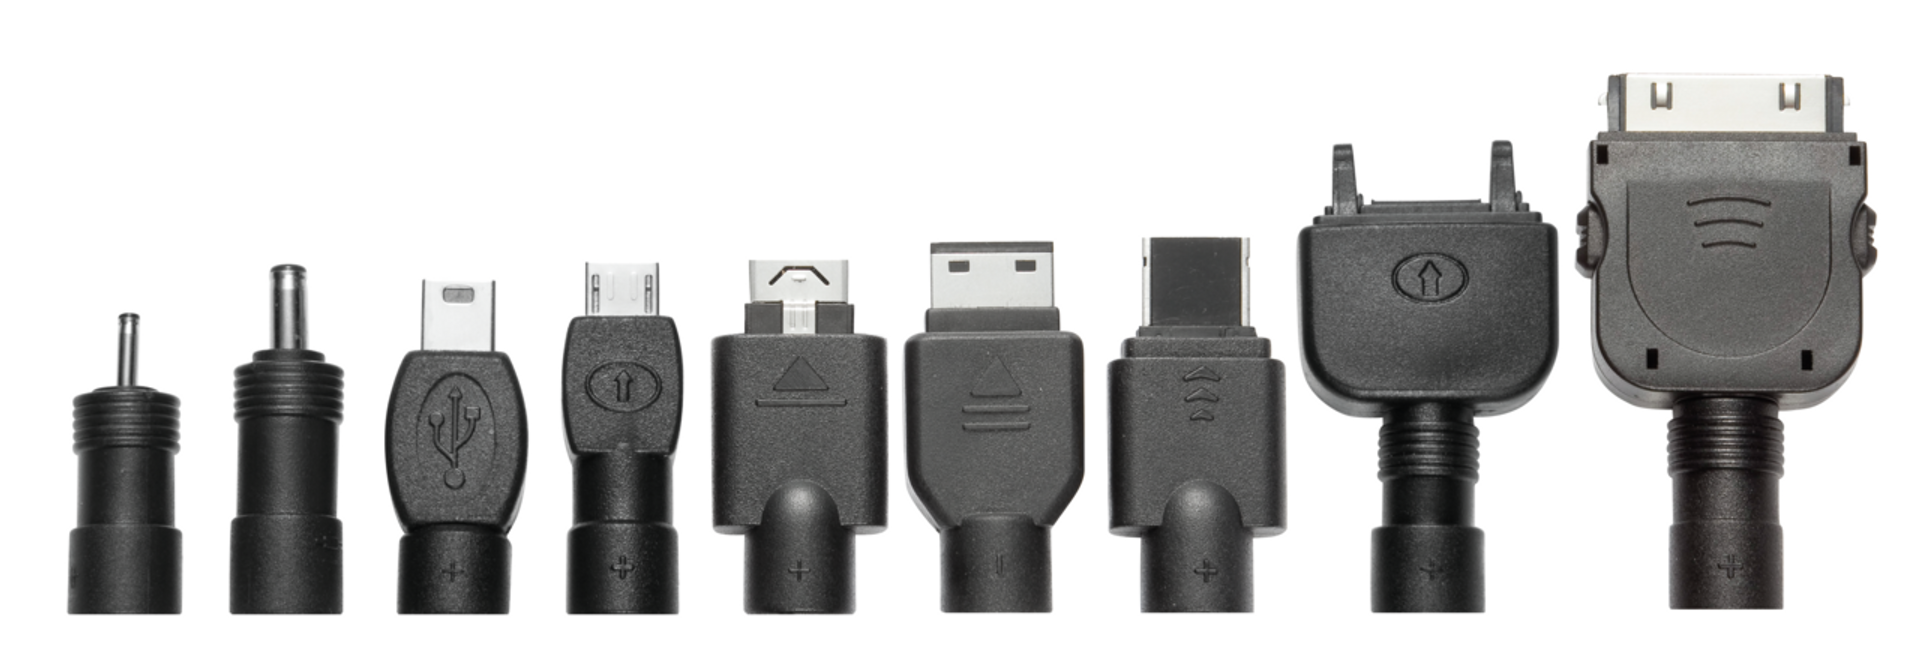 USB Charge Tip Pack for mobile devices-Visual